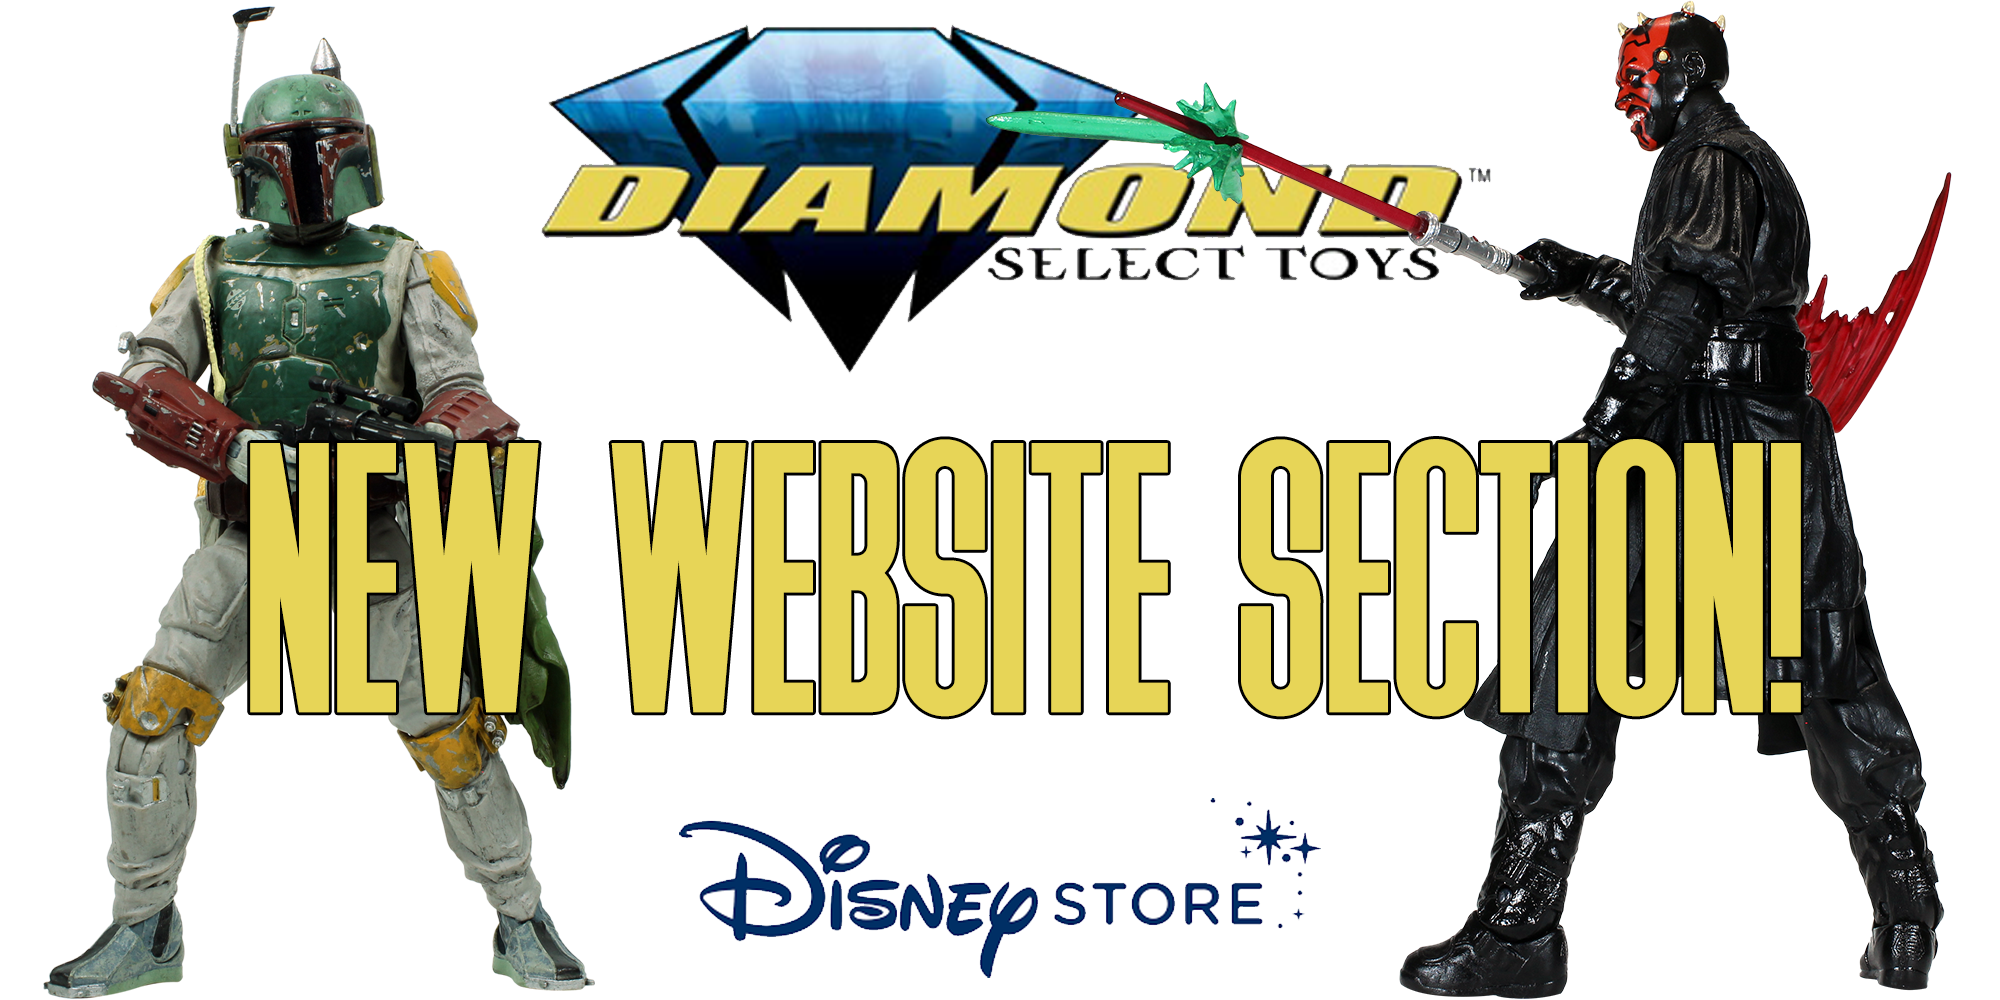 Diamond Select Toys - New Website Section!